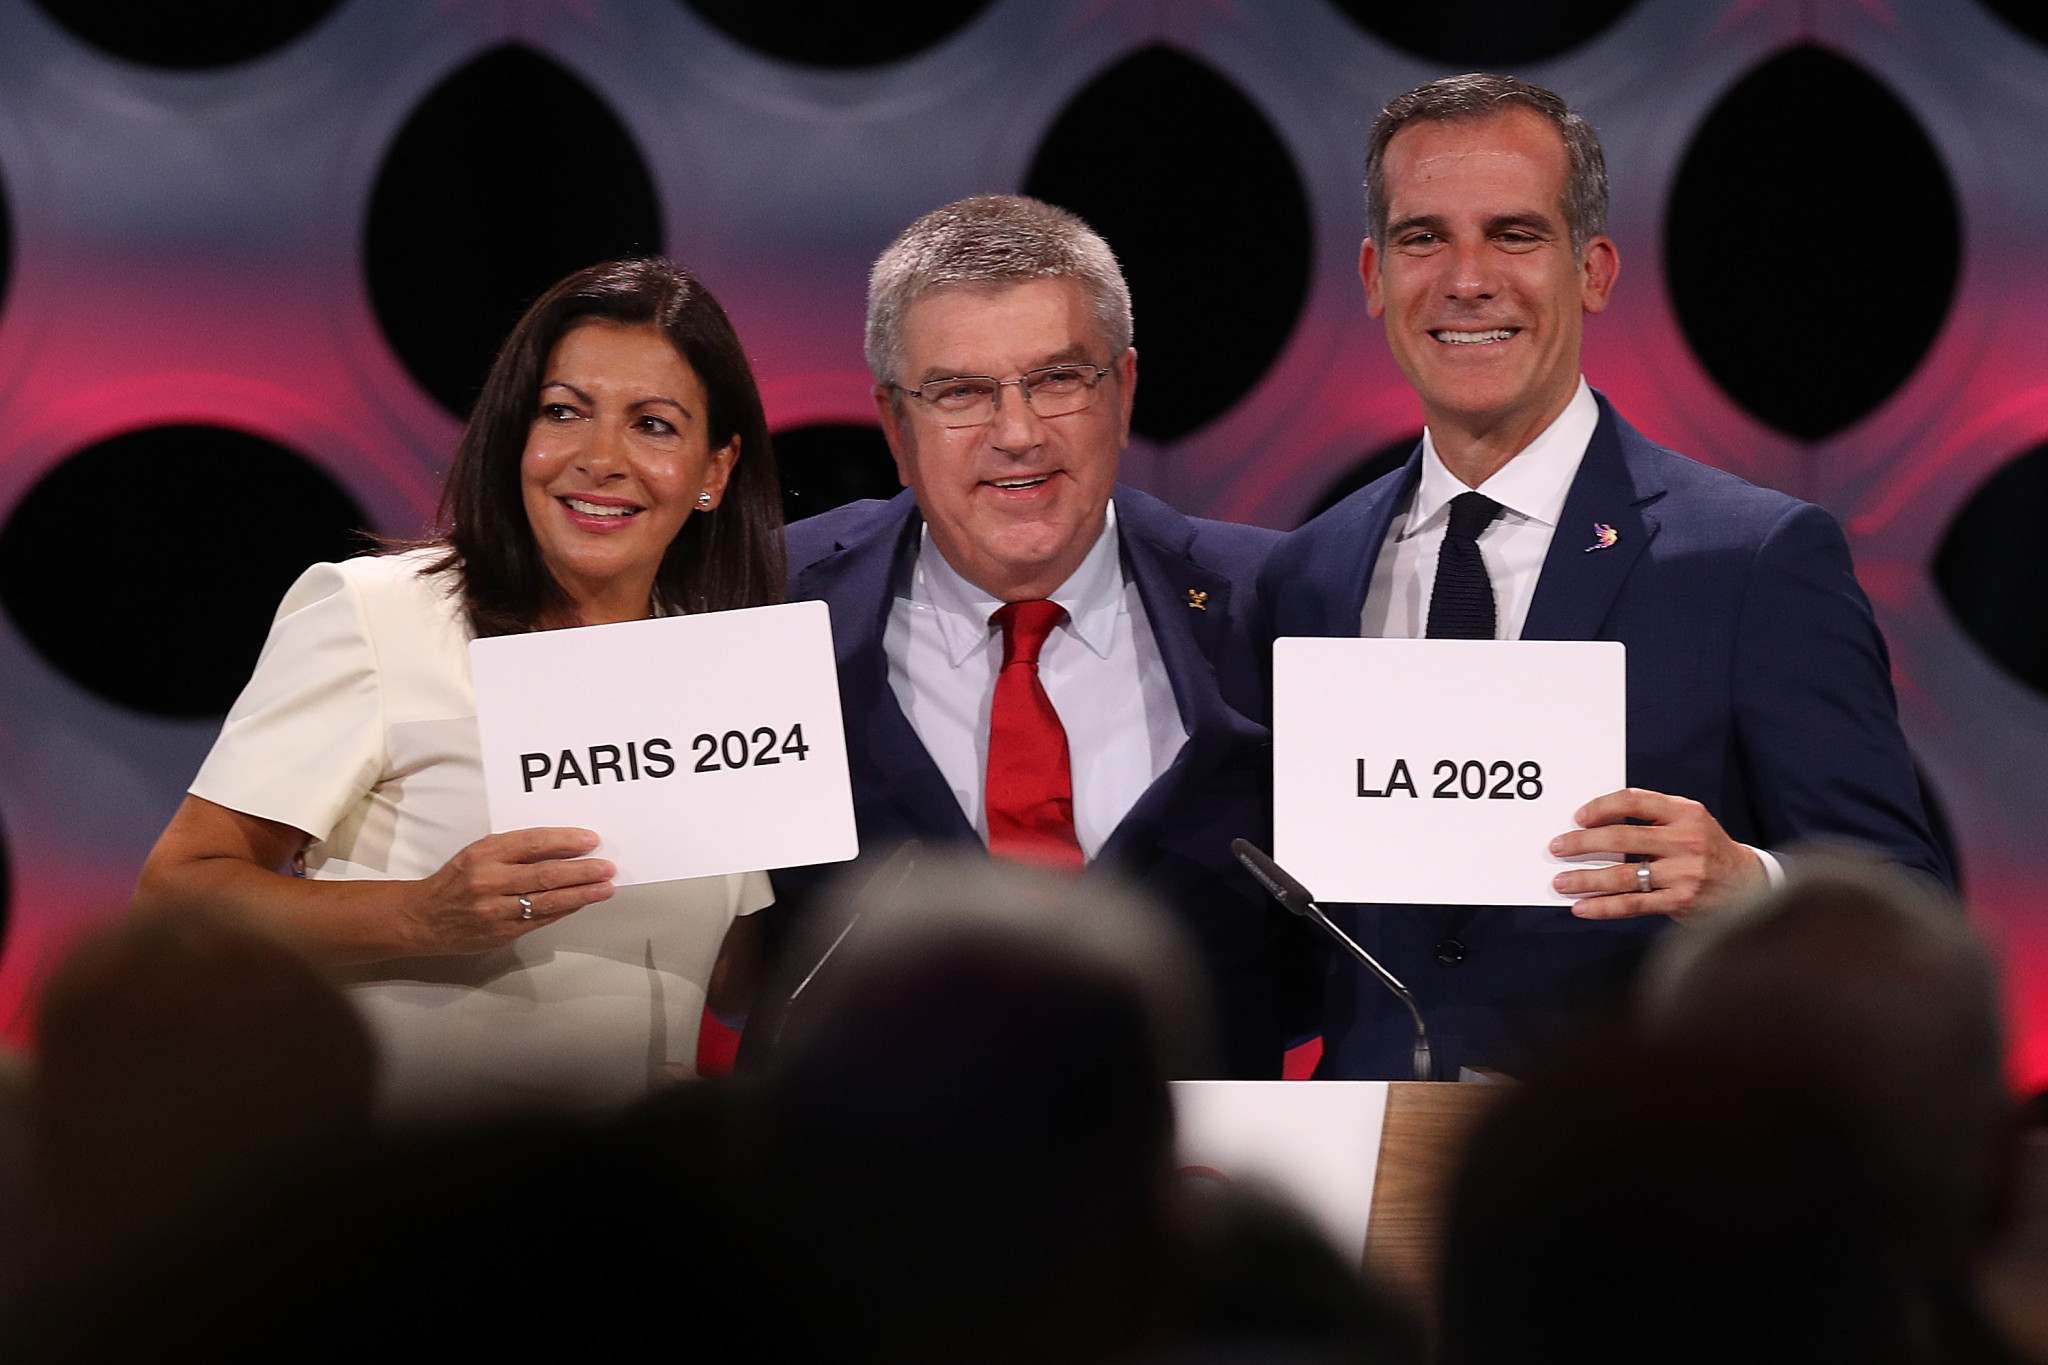 Paris 2024 and Los Angeles 2028 could work together on joint marketing agreements to maximise the impact of two Olympics having been awarded at the same time, offering companies a unique opportunity ©Getty Images